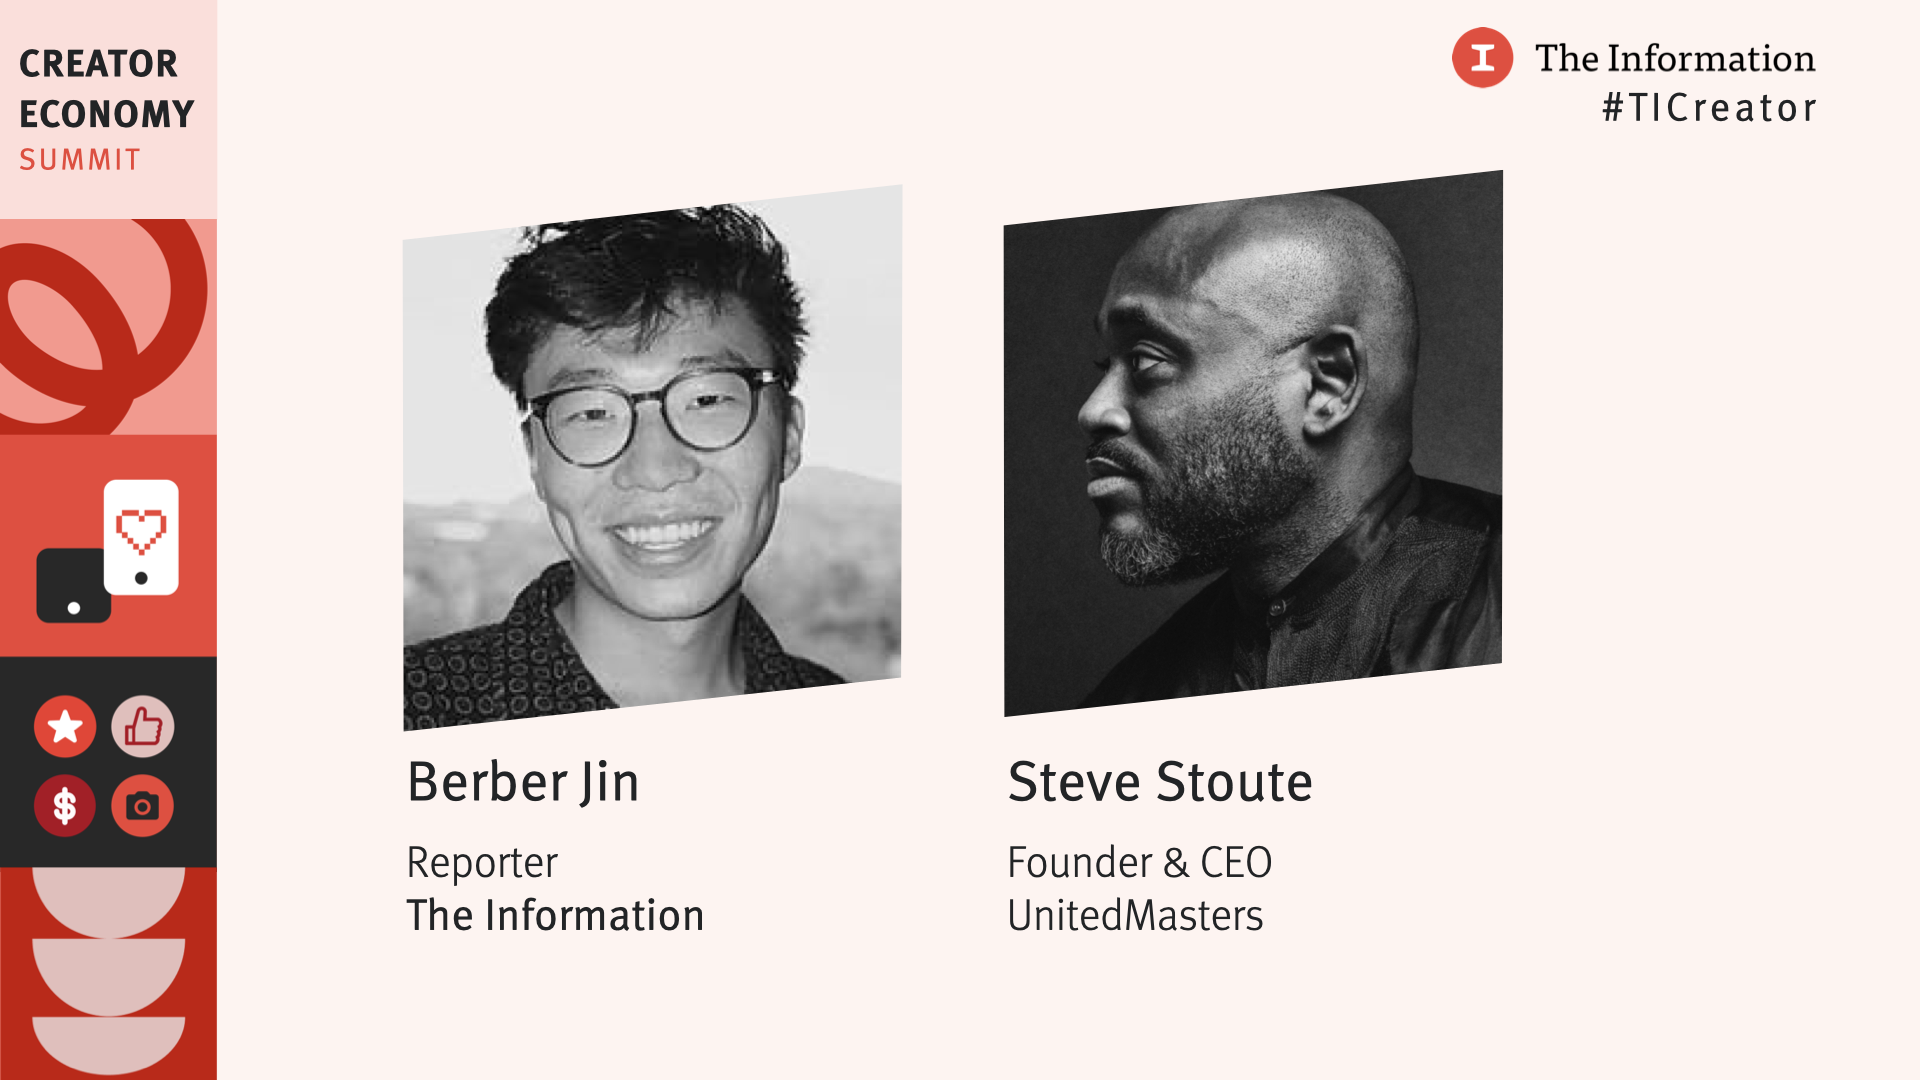 Creator Economy Summit 2021 - Music Discovery & the Creator Economy - Steve Stoute, Founder & CEO, UnitedMasters in conversation with Berber Jin, Reporter, The Information